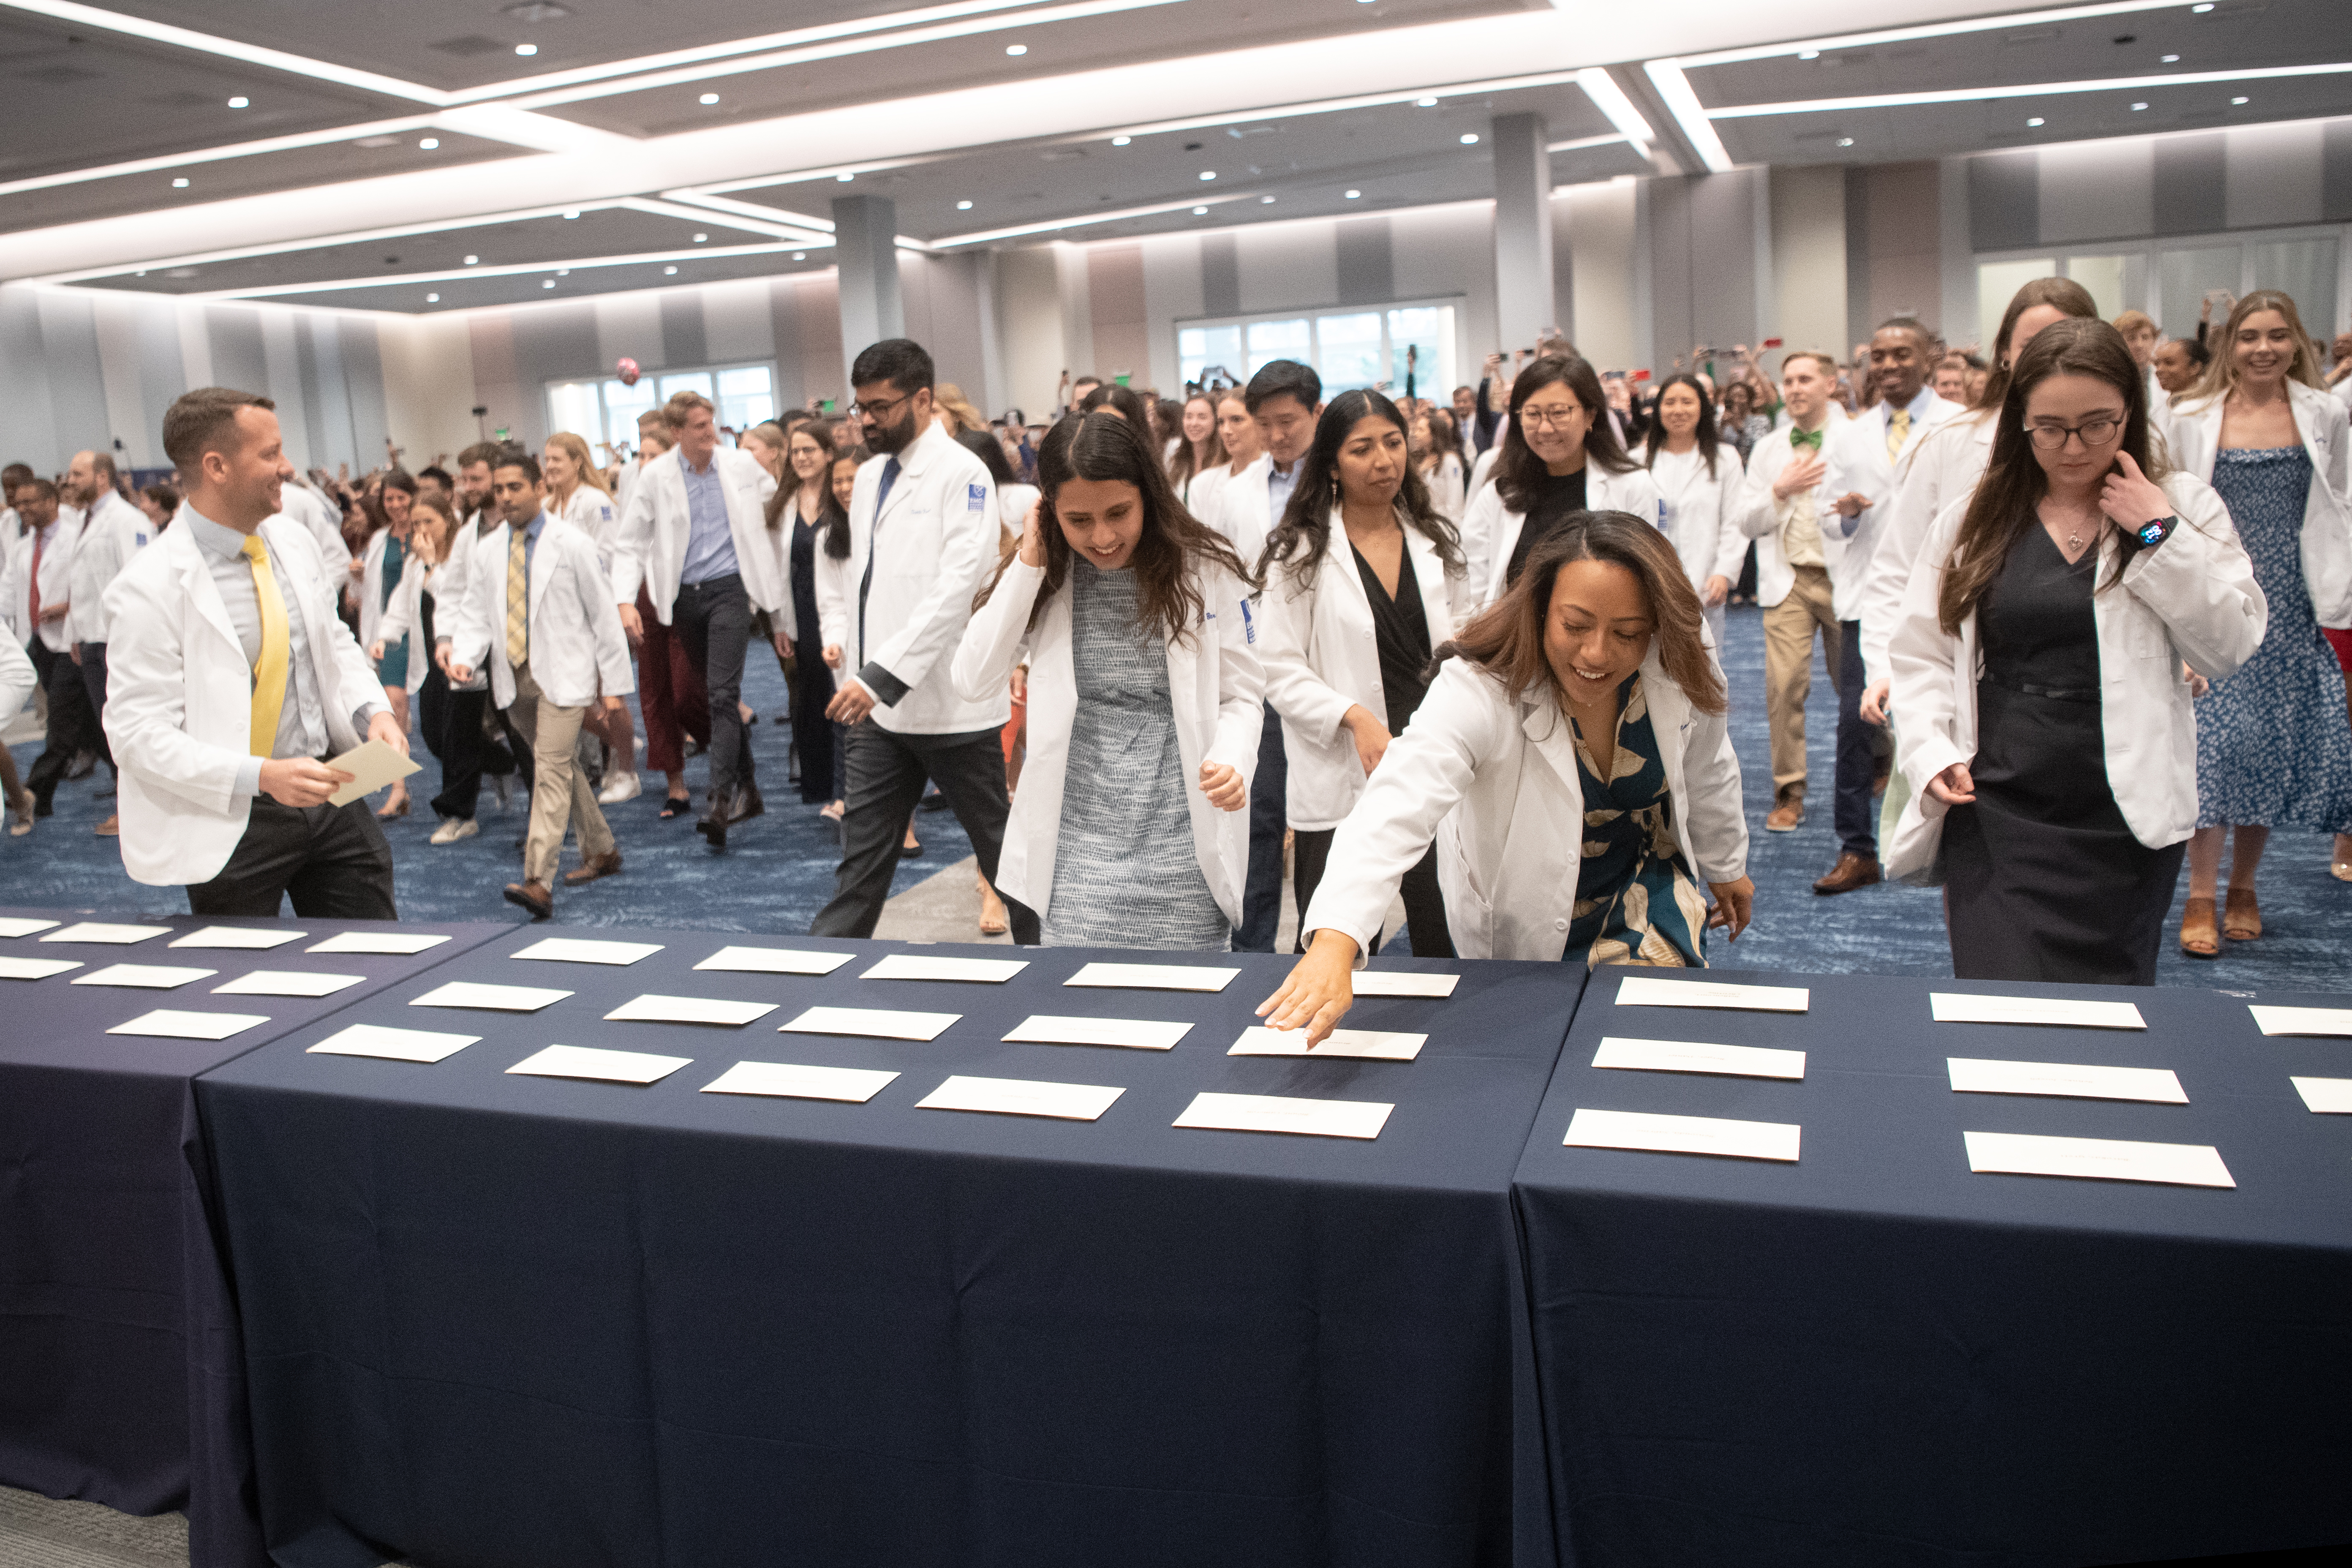 students in white coats sitting in a full audience